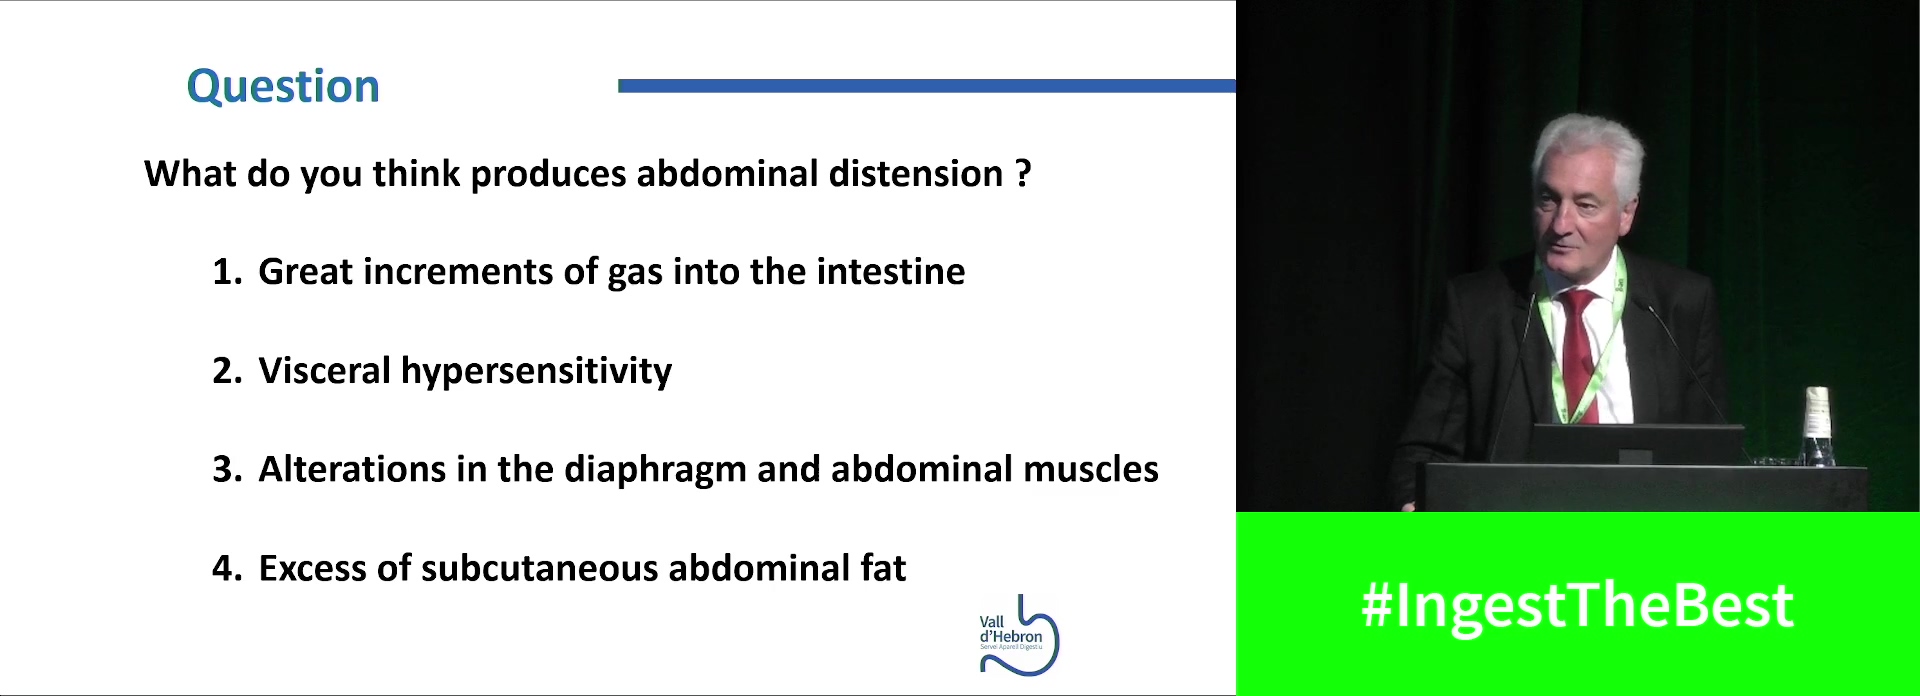 Bloating and abdominal distension